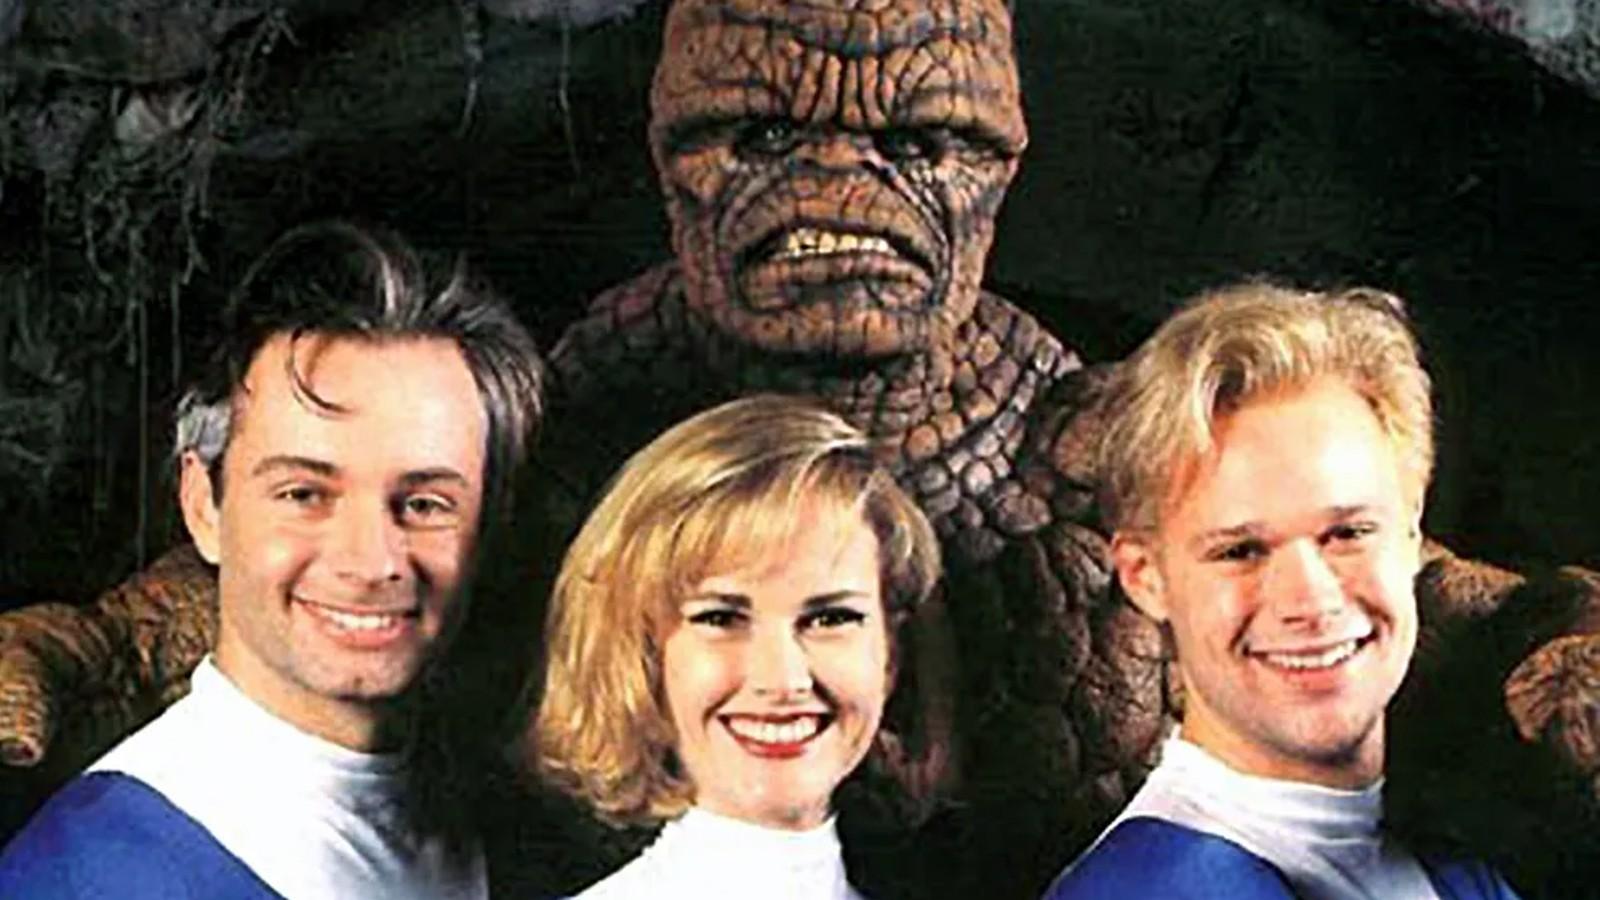 All four of the Fantastic Four grinning.